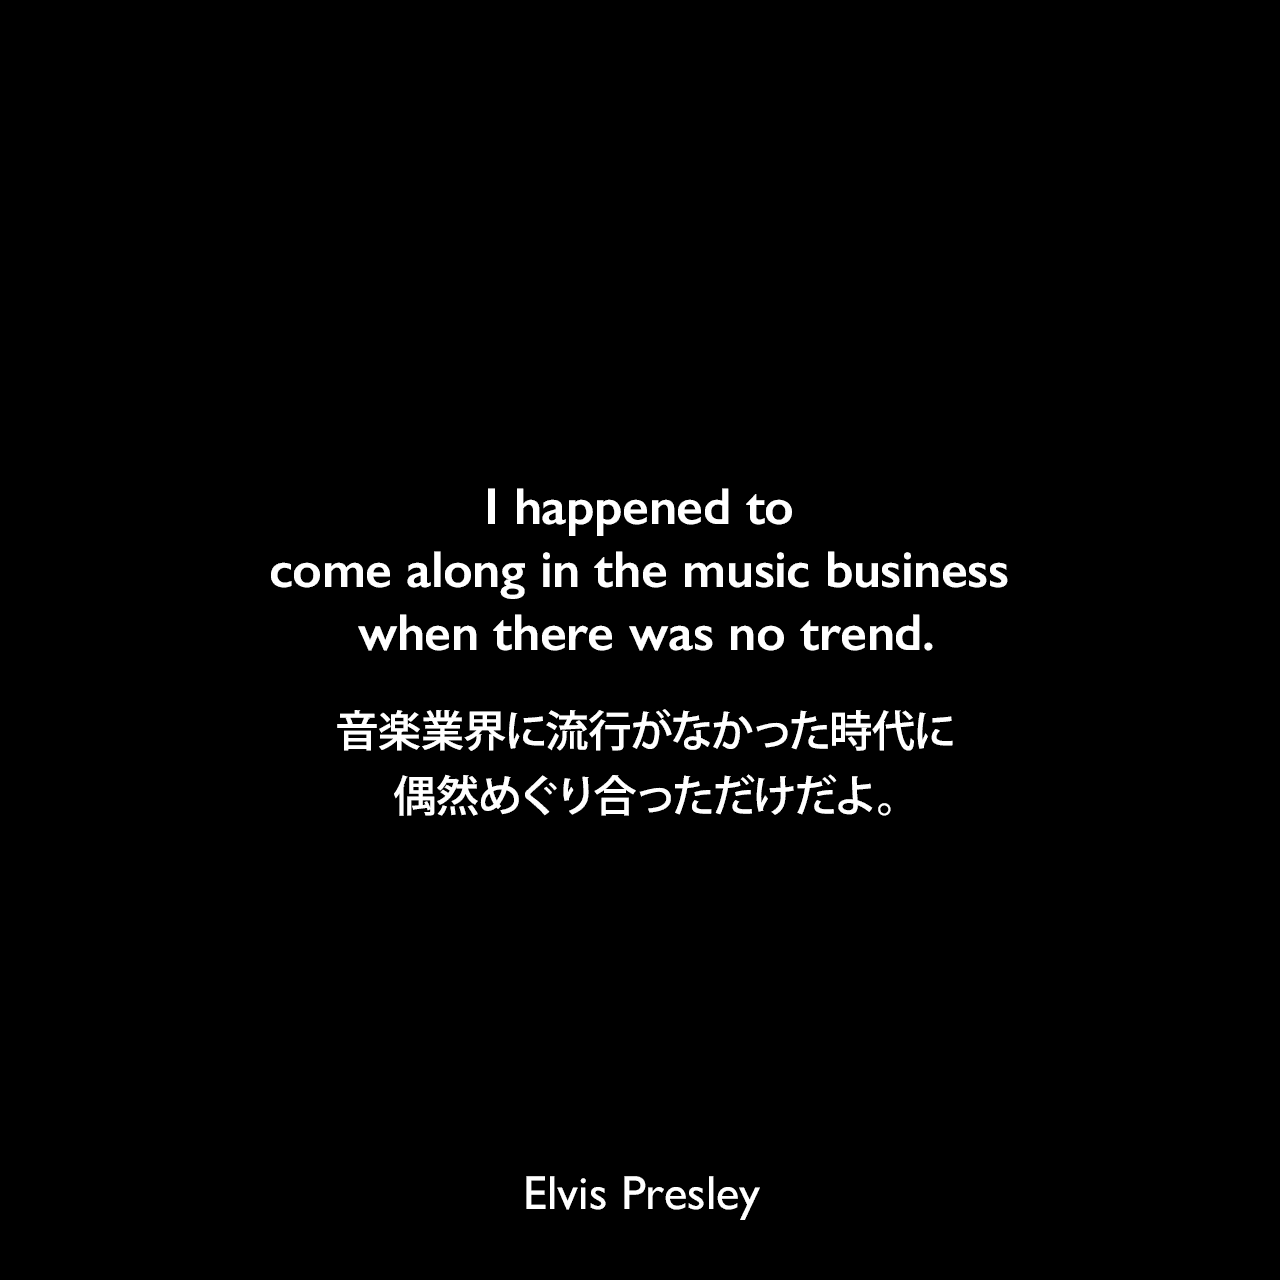 I happened to come along in the music business when there was no trend.音楽業界に流行がなかった時代に偶然めぐり合っただけだよ。Elvis Presley